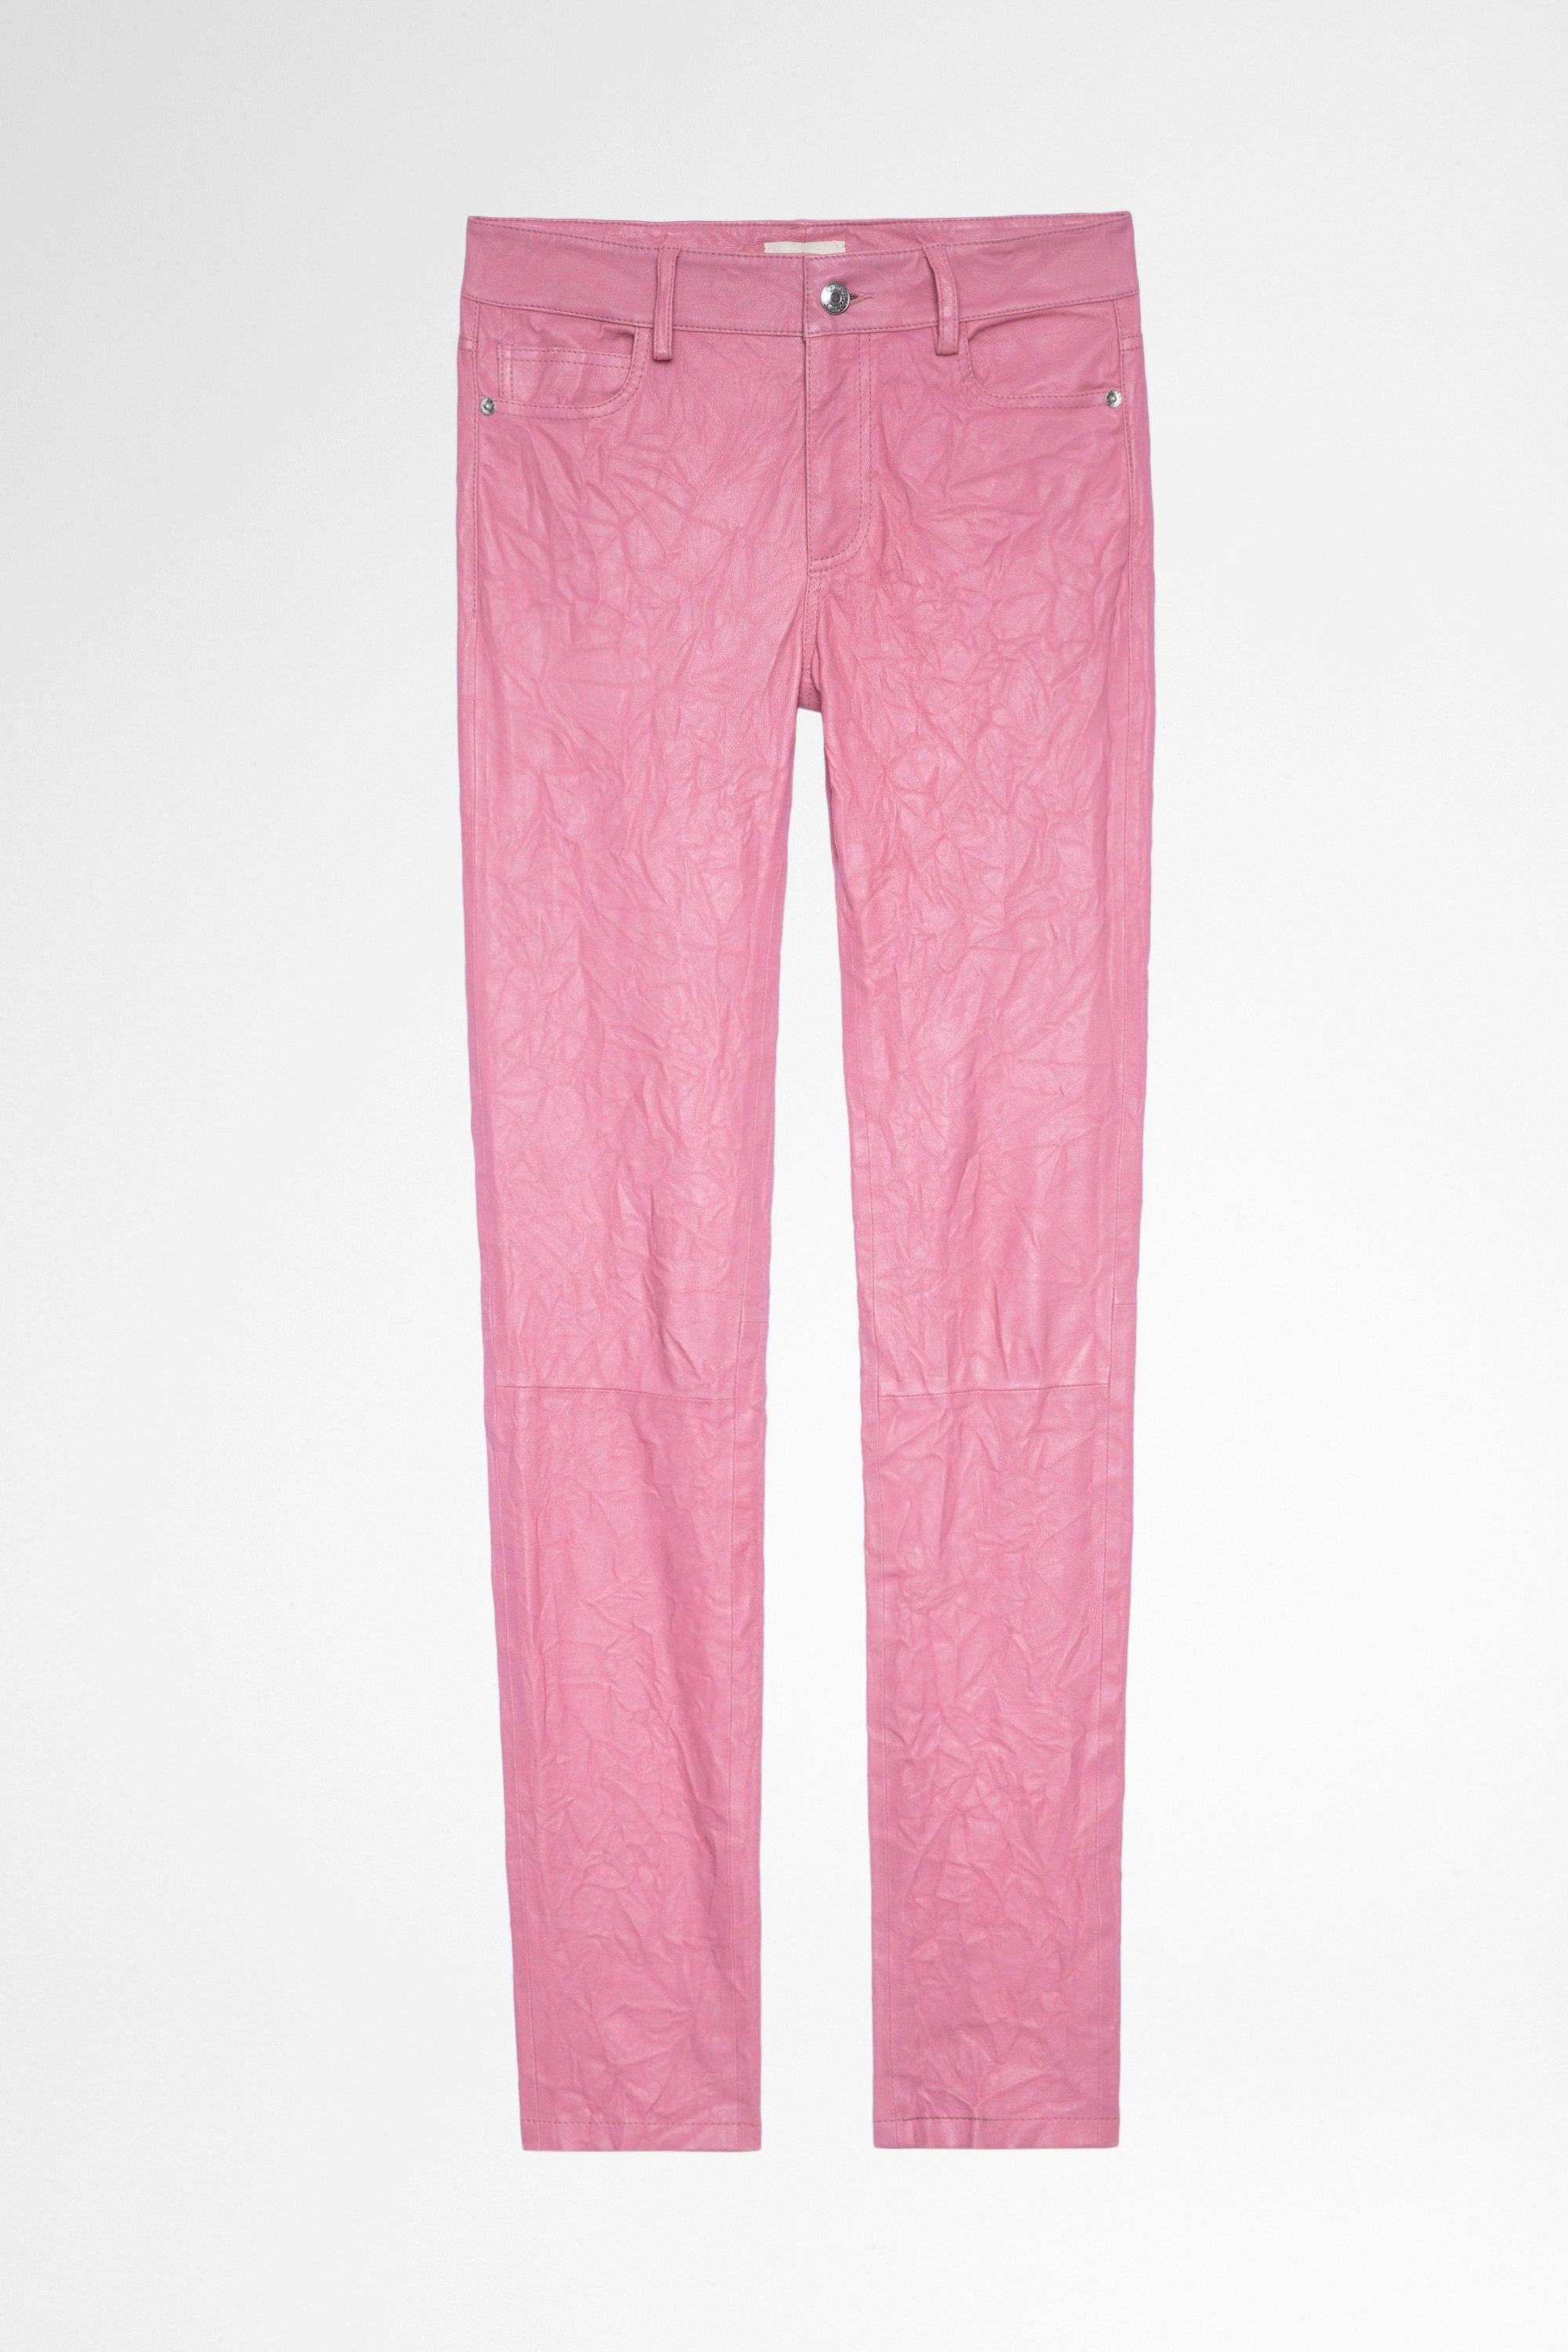 Phlame Creased Leather Trousers Women's pink crumpled leather pants. Buying this product, you support a responsible leather production through Leather Working Group.